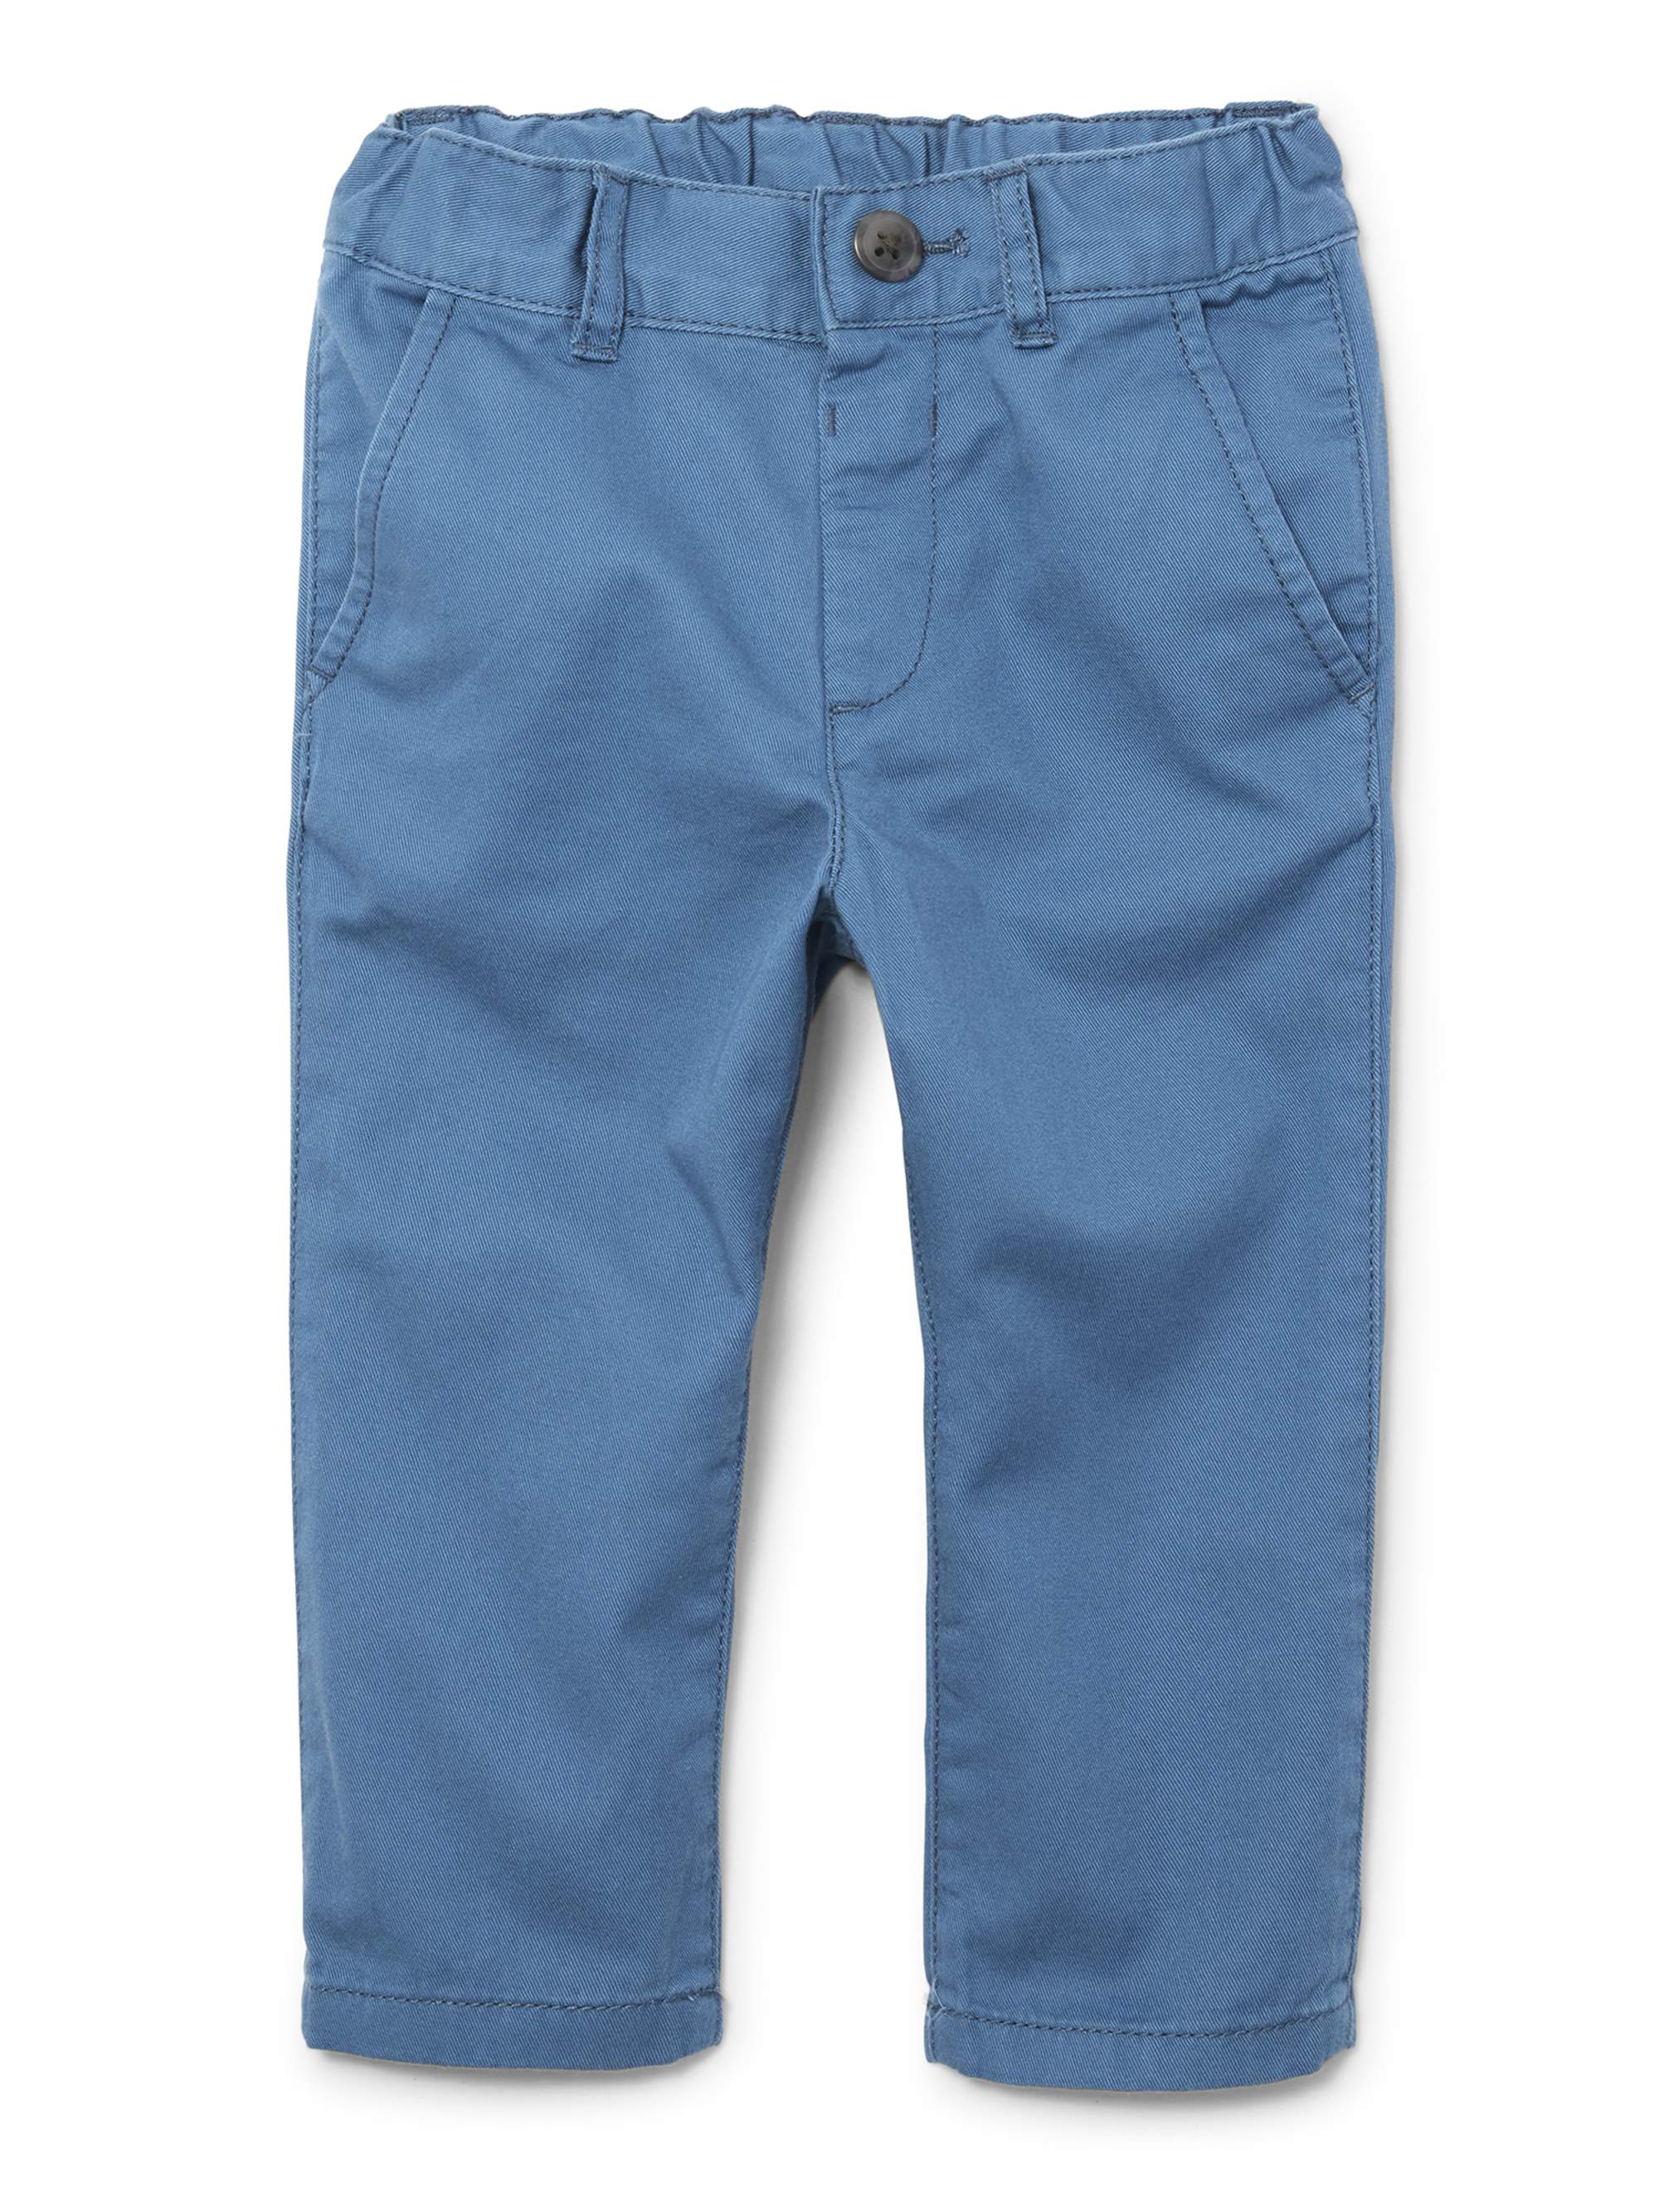 The Childrens Place Boys Toddler Stretch Corduroy Pants